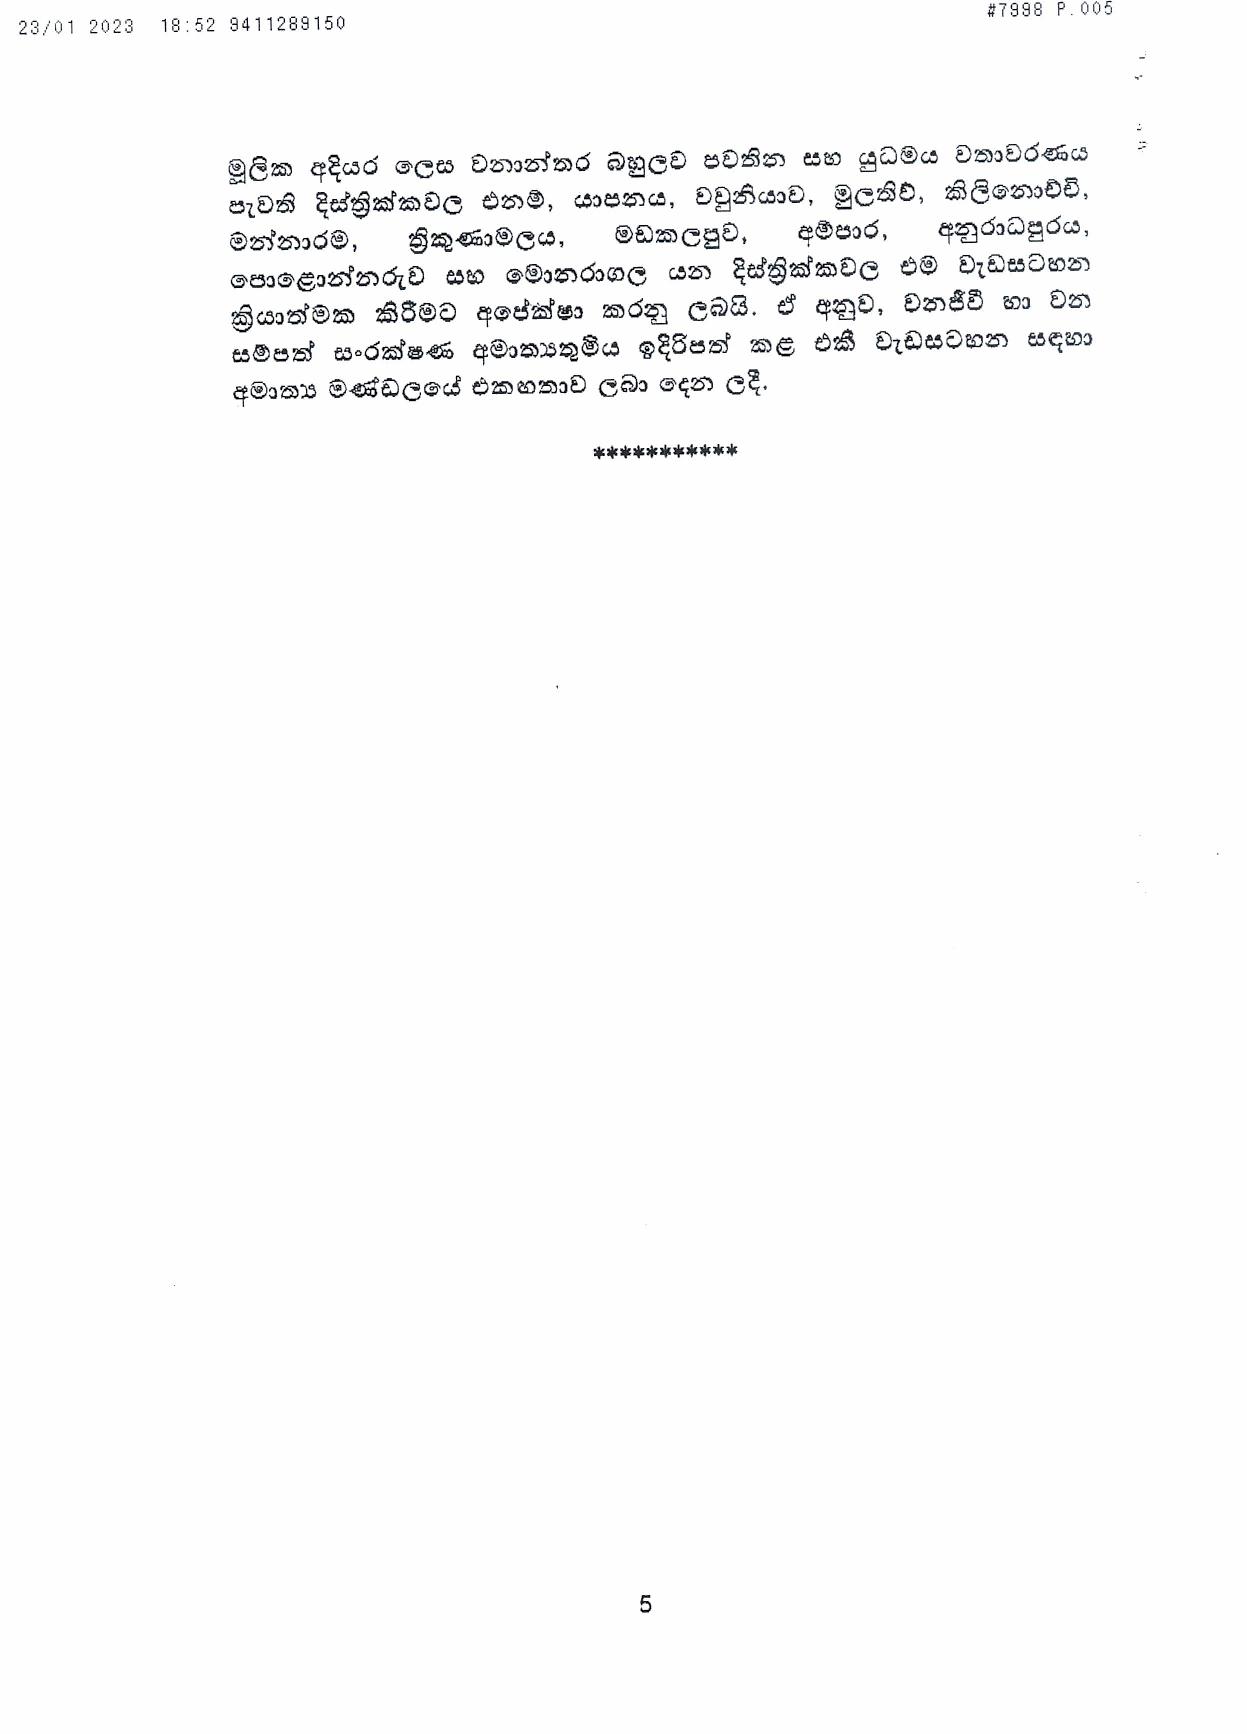 Cabinet Decision on 23.01.2023 page 005